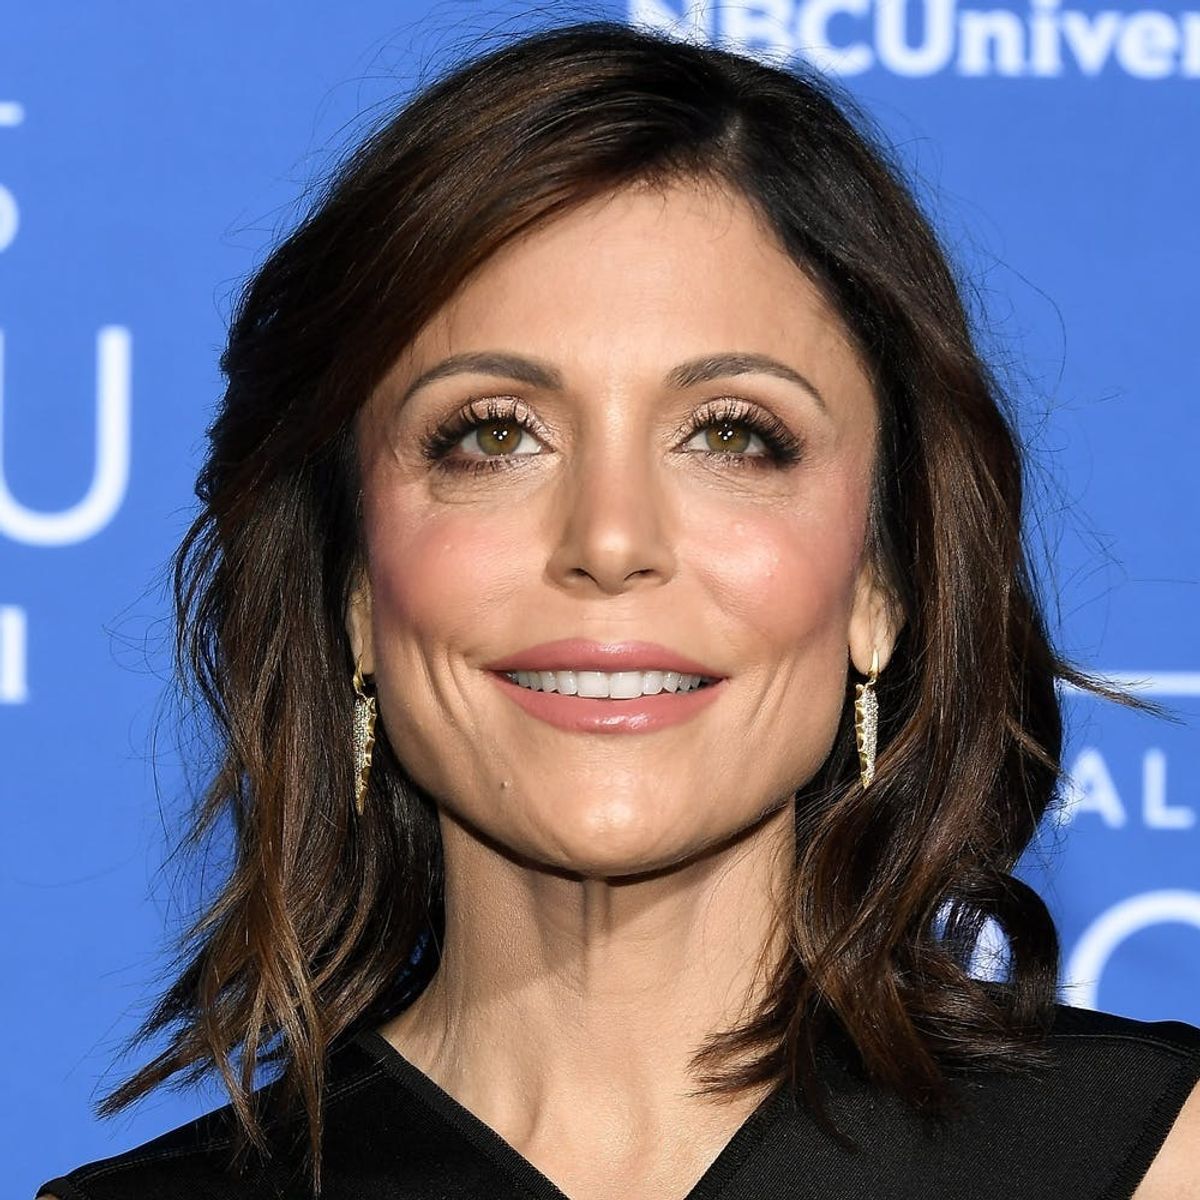 Bethenny Frankel Flew to Puerto Rico With Four Chartered Planes Full of Supplies